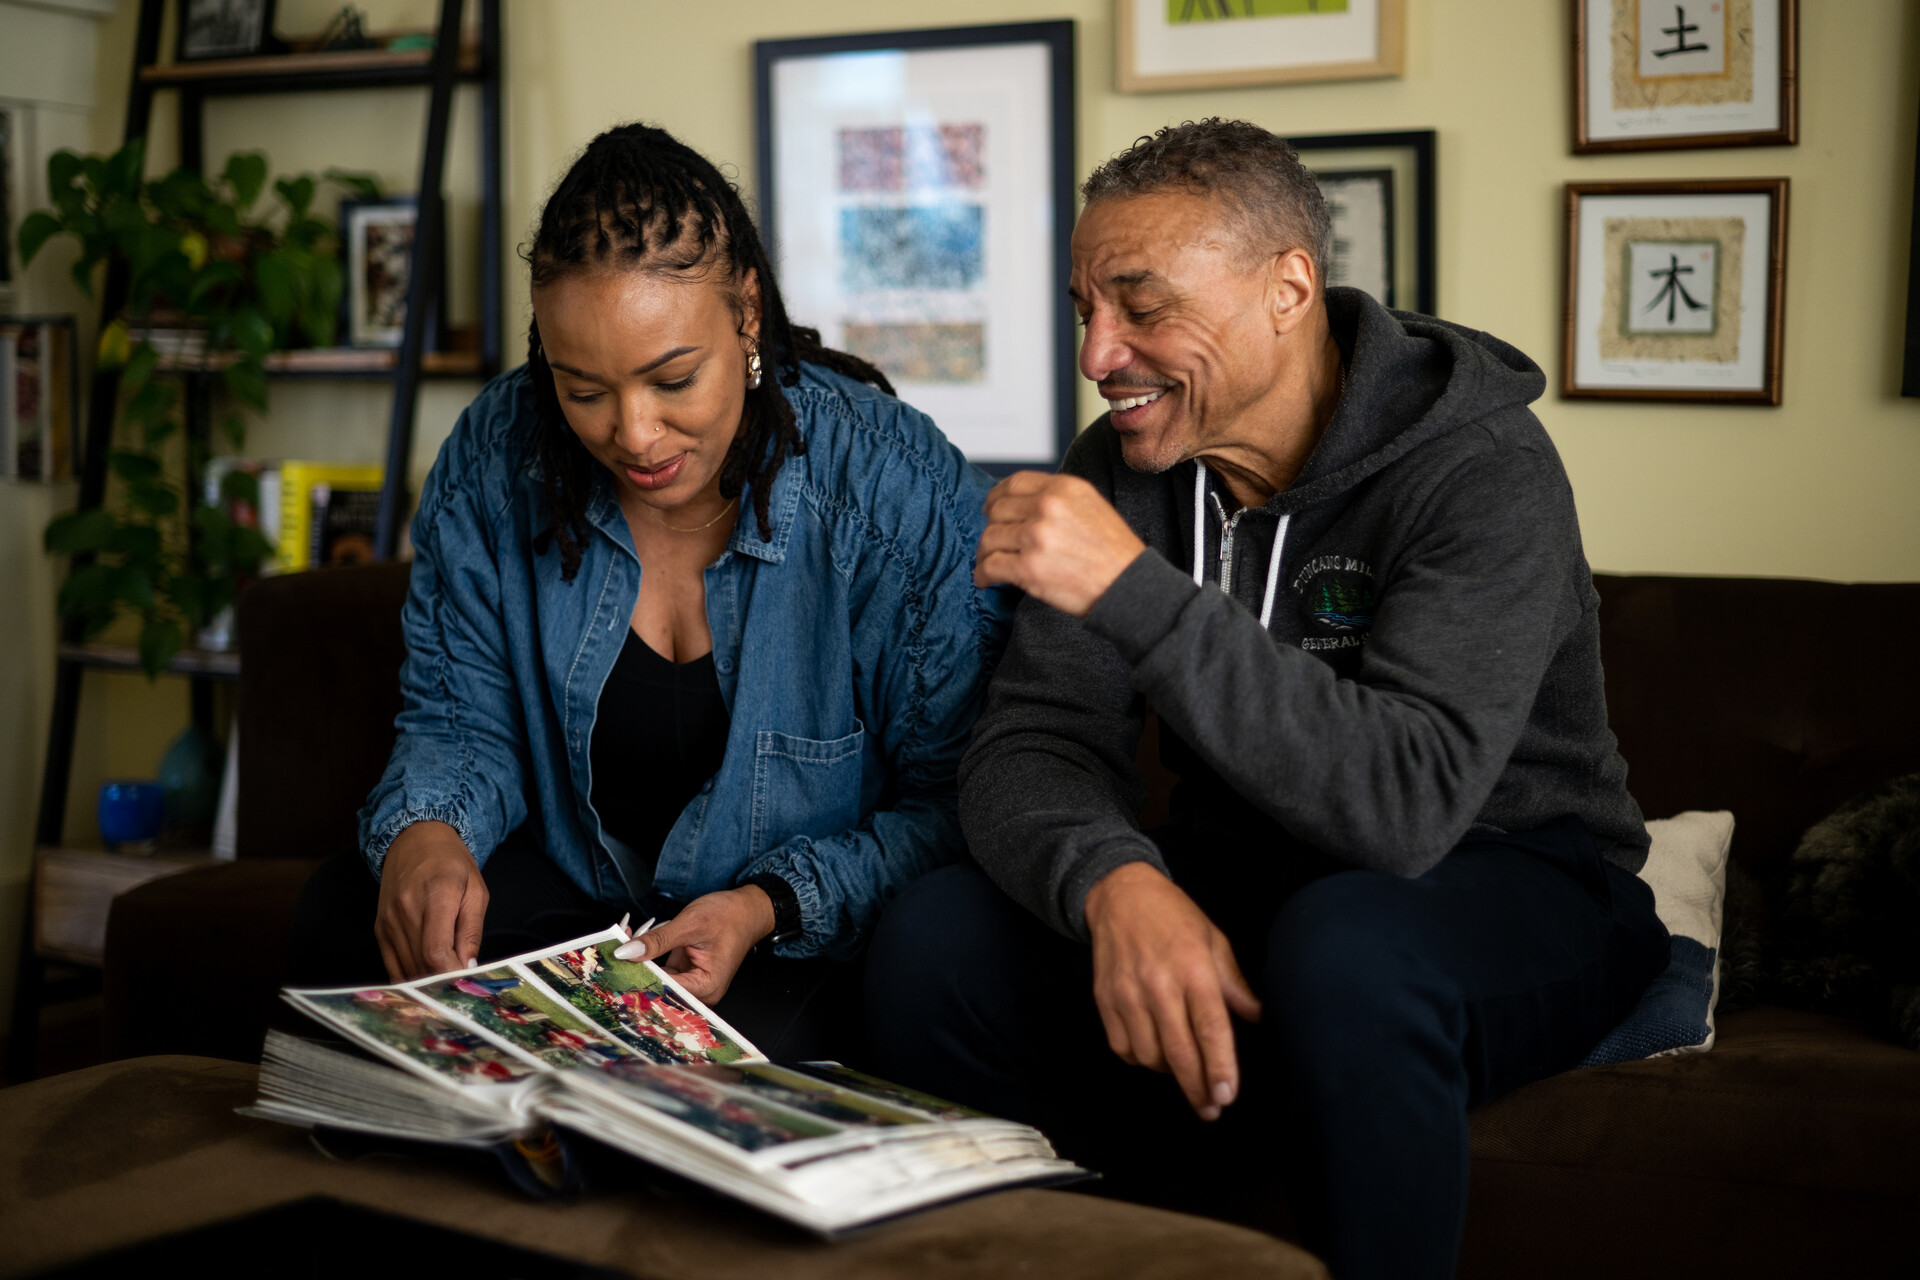 A Black woman wearing a jean, long-sleeved shirt and black T-shirt underneath sits on a couch inside a living room with her father to the right. He wears a gray, hooded sweatshirt. The two smile as they look down at a photo album together.